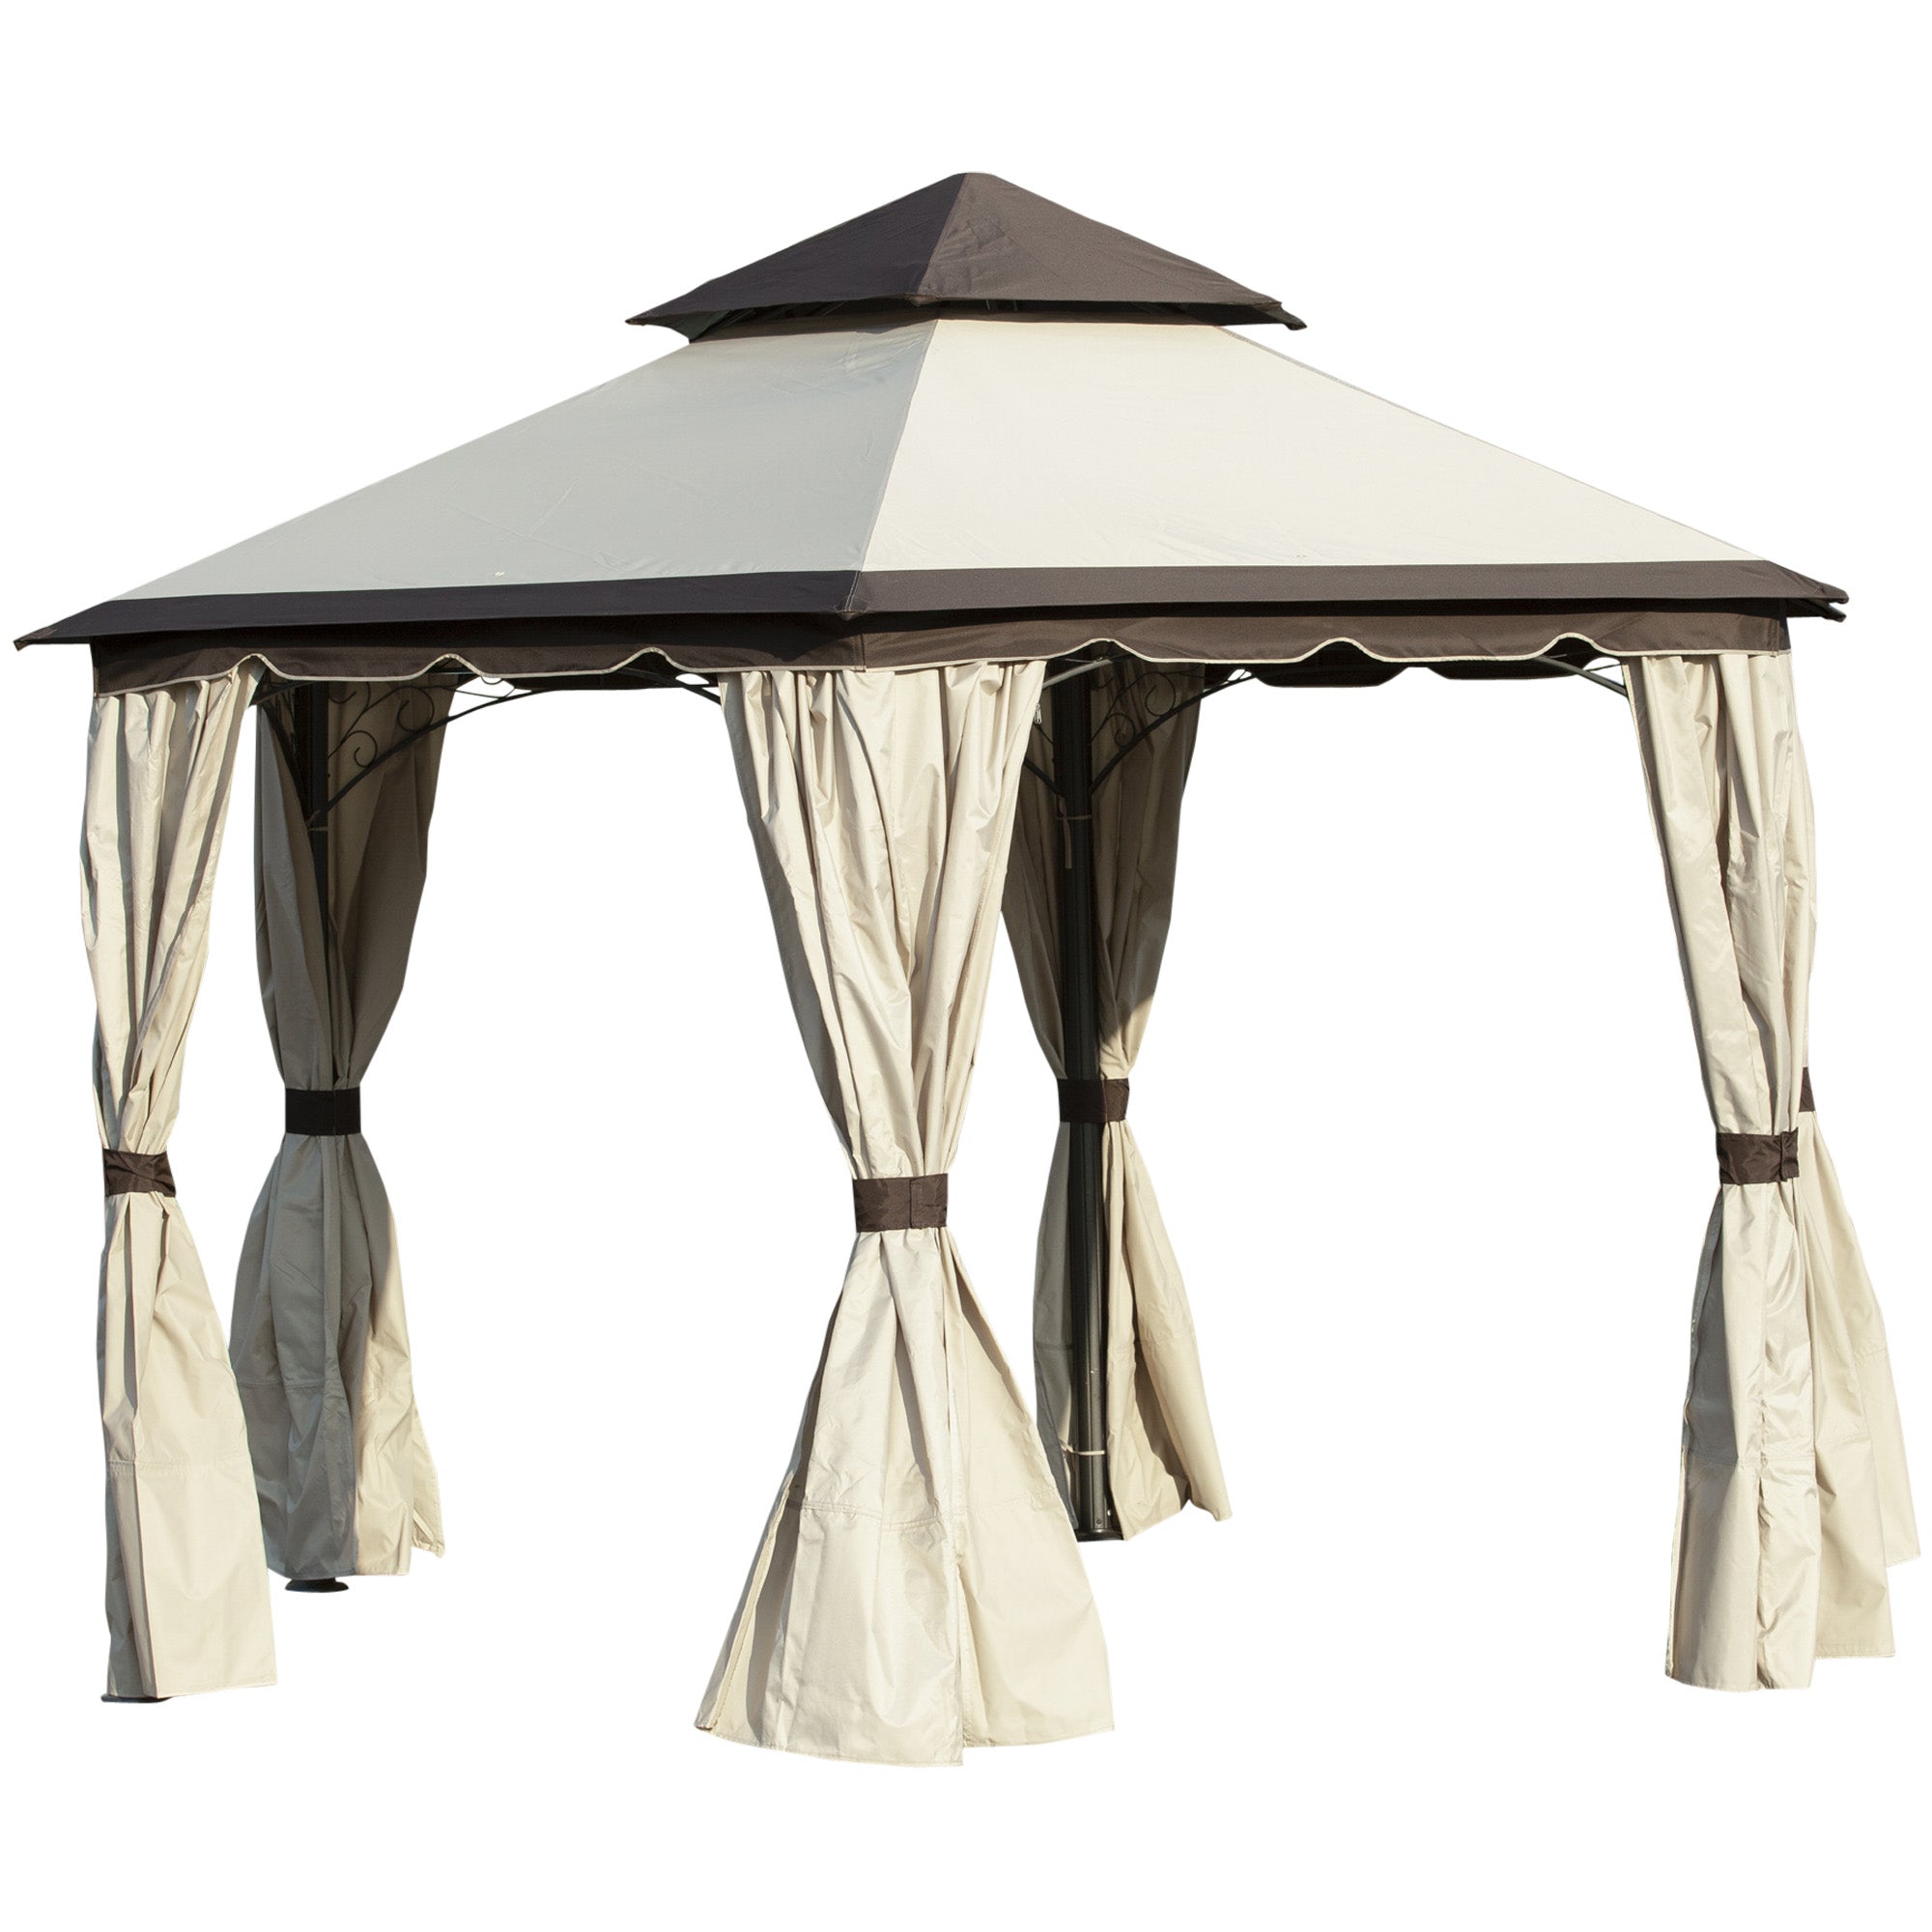 Outsunny 3.4m Steel Gazebo Pavillion for Outdoor w/ Curtains and 2 Tier Roof  | TJ Hughes